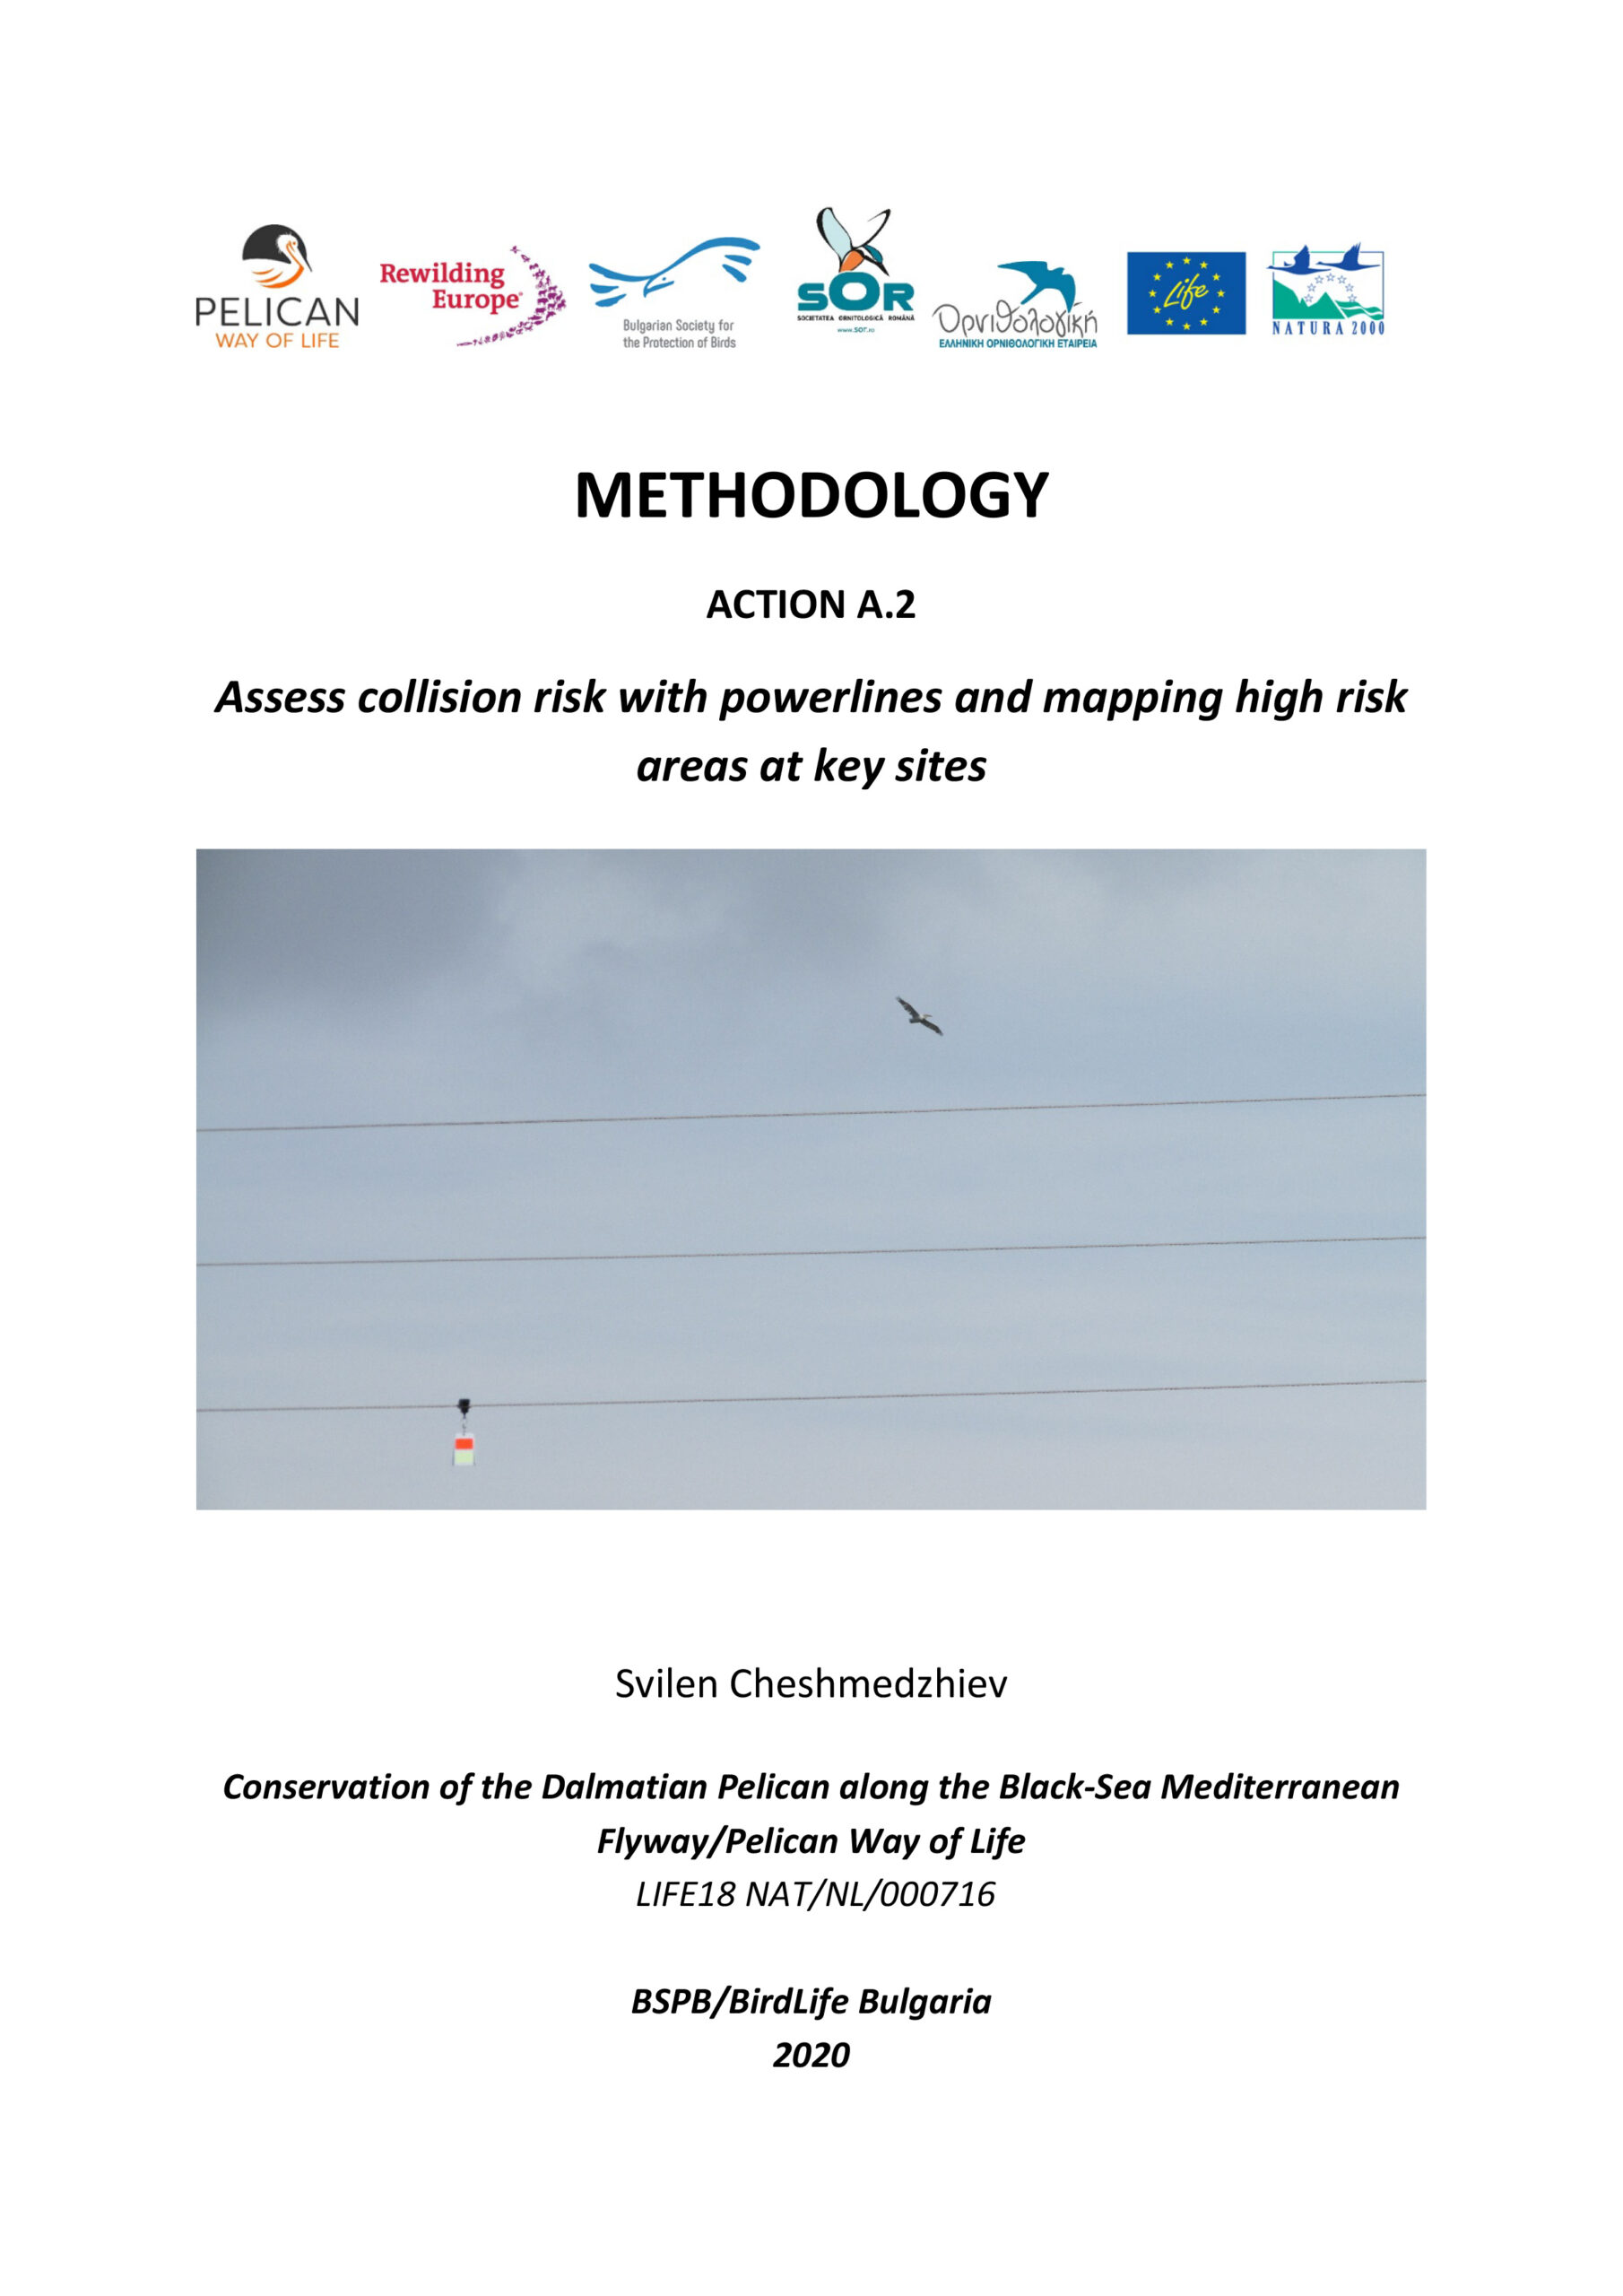 Methodology “Assess collision risk with powerlines and mapping high risk areas at key sites”